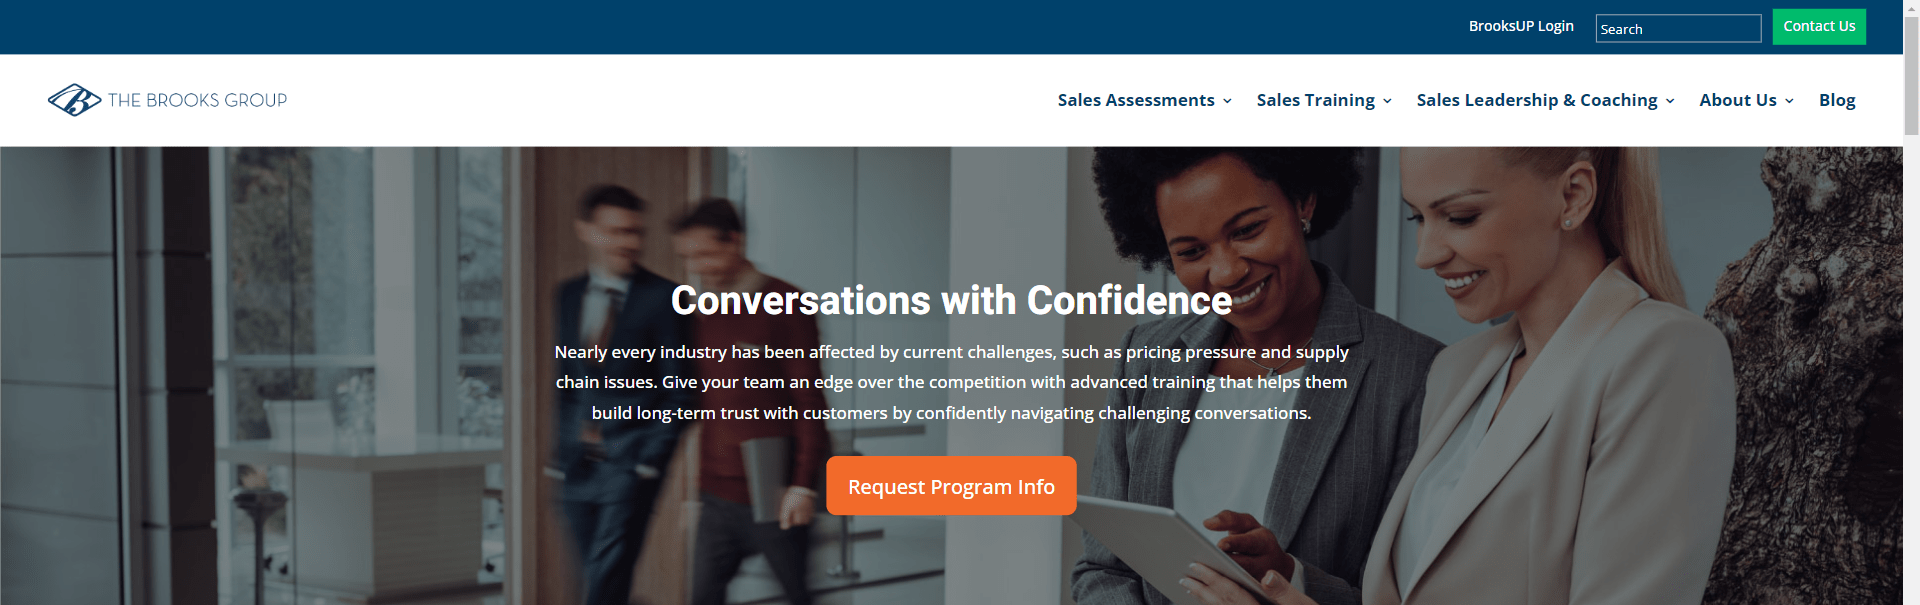 Conversations with Confidence by The Brooks Group 